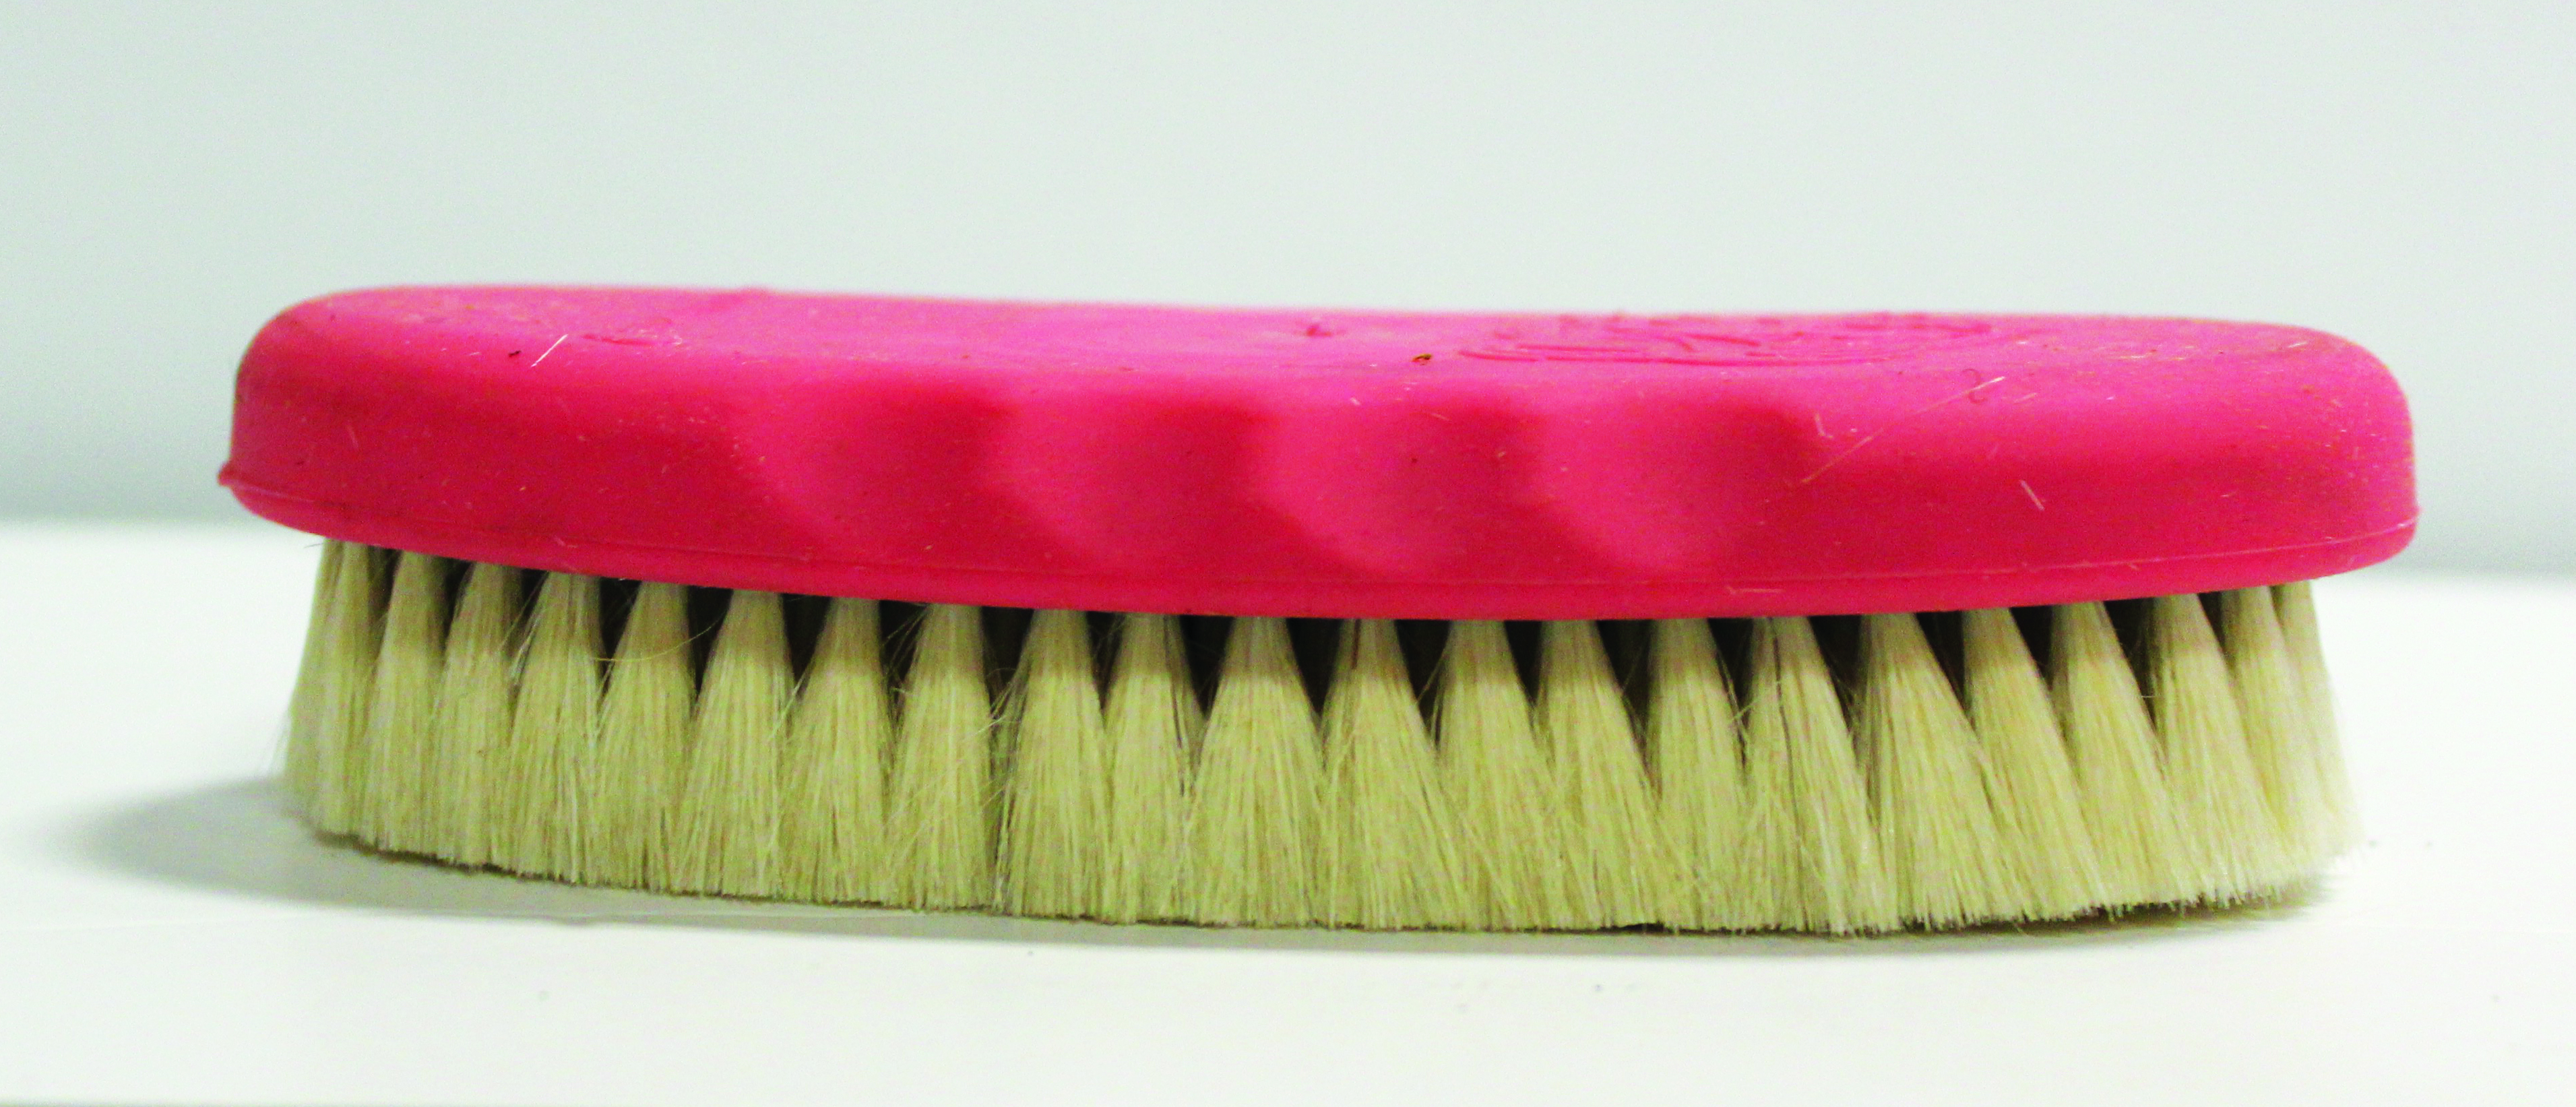 Tail Tamer - Large Horsehair Brush Assorted - System Equine